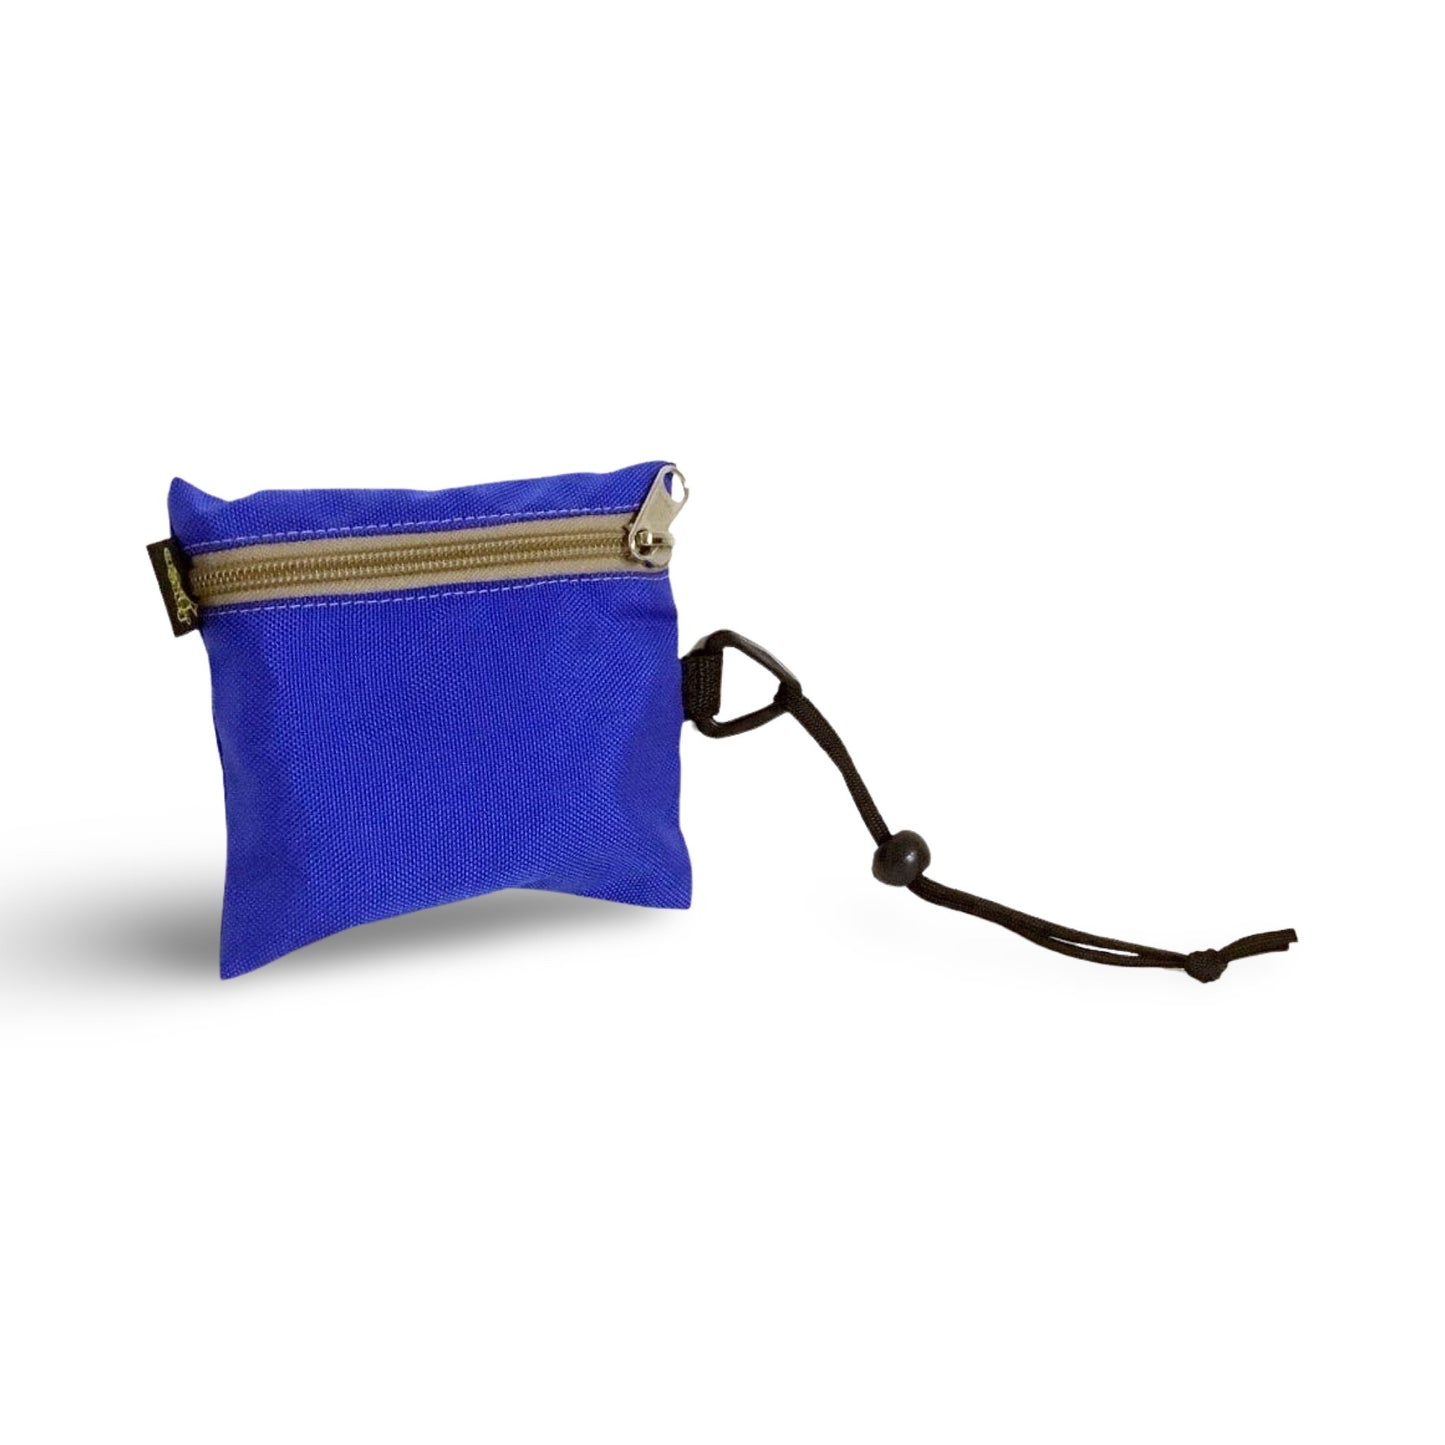 SMALL POUCH with Strap